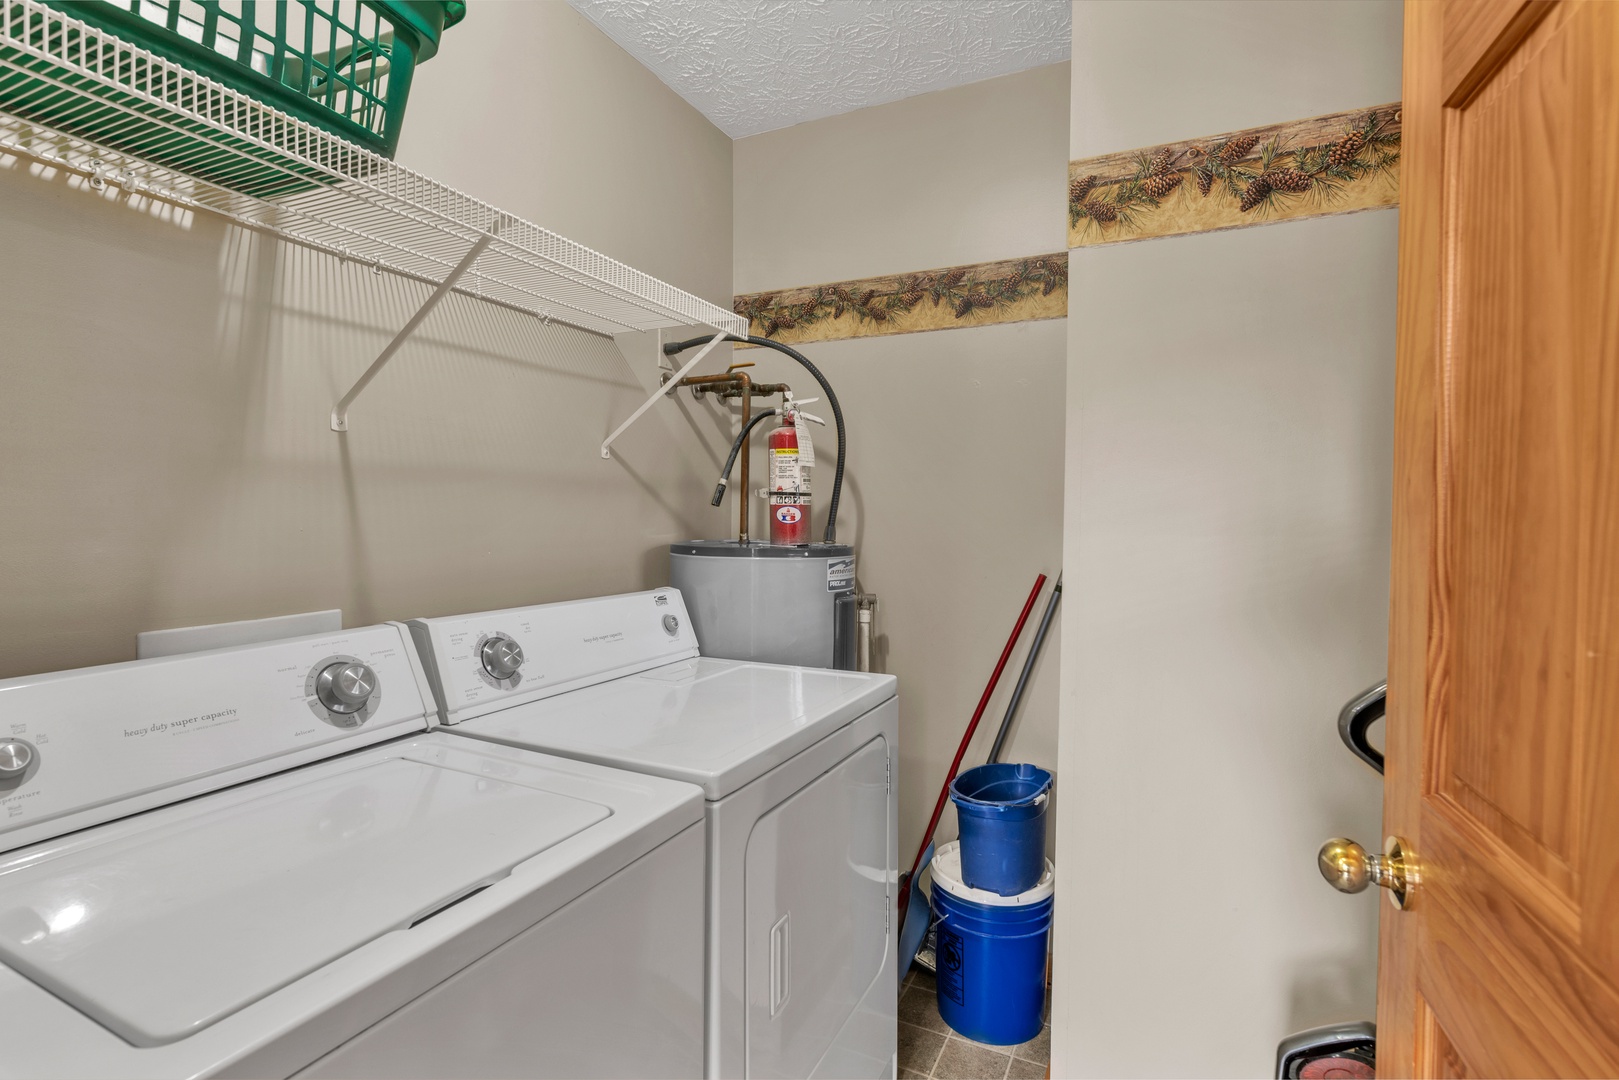 Private laundry is available for your stay, tucked away in the half bath area